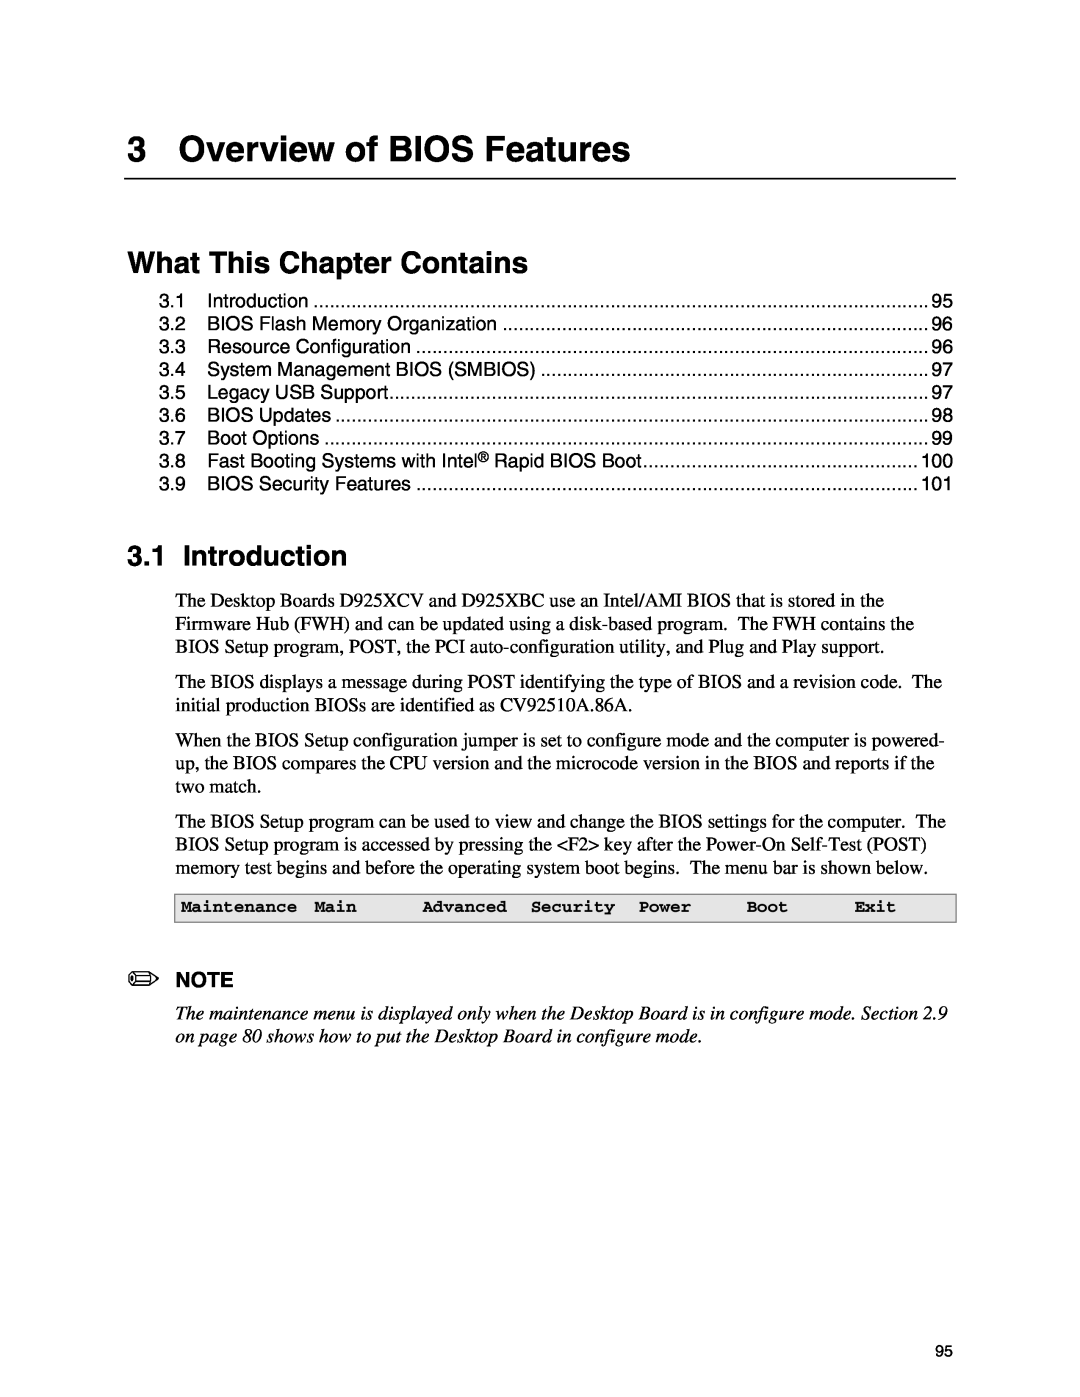 Intel D925XBC, D925XCV specifications Overview of BIOS Features, Introduction, What This Chapter Contains 